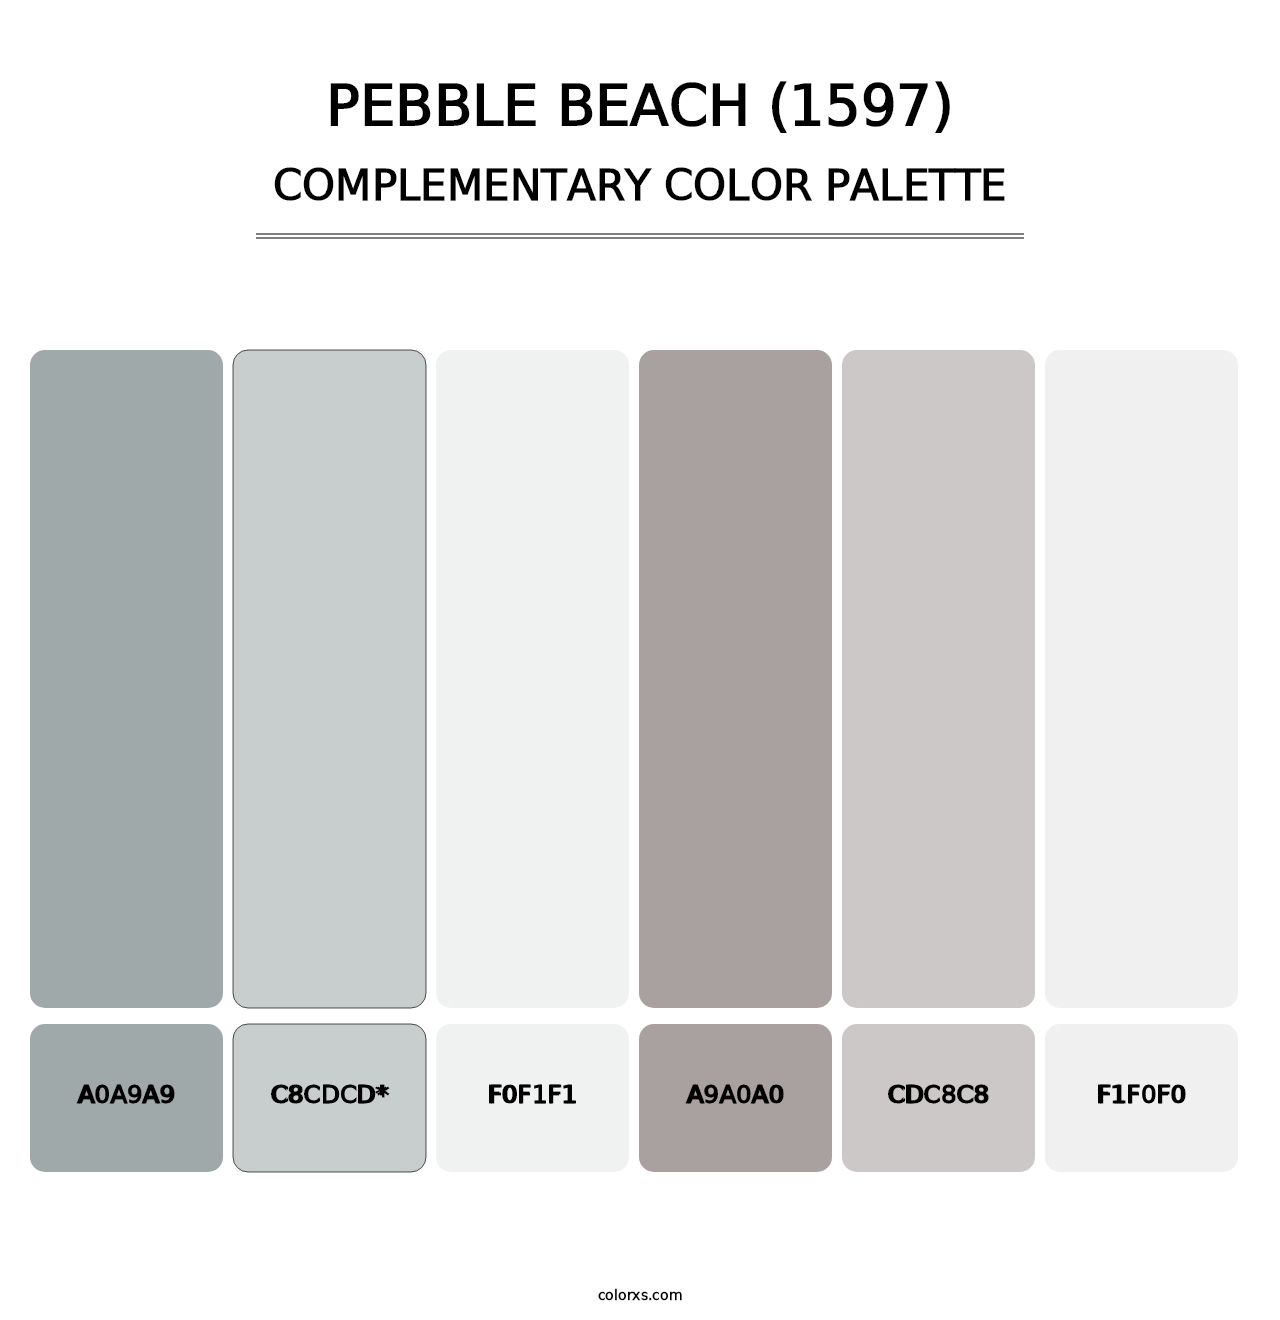 Pebble Beach (1597) - Complementary Color Palette